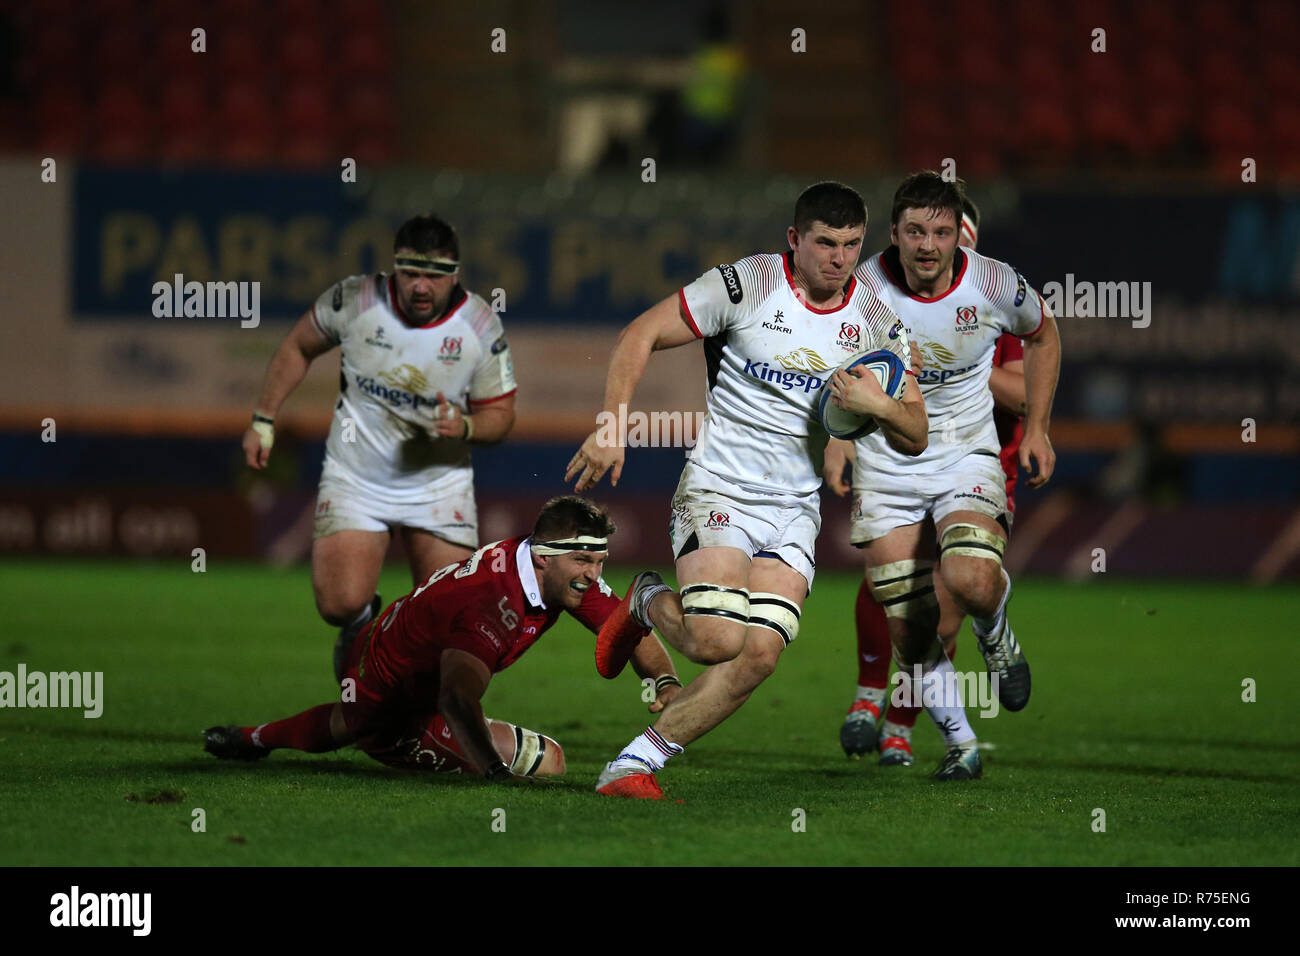 Llanelli, UK. 07th Dec, 2018. Nick Timoney of Ulster rugby Credit: makes a break. Scarlets v Ulster rugby, Heineken European Champions Cup, pool 4 match at Parc y Scarlets in Llanelli, South Wales on Friday 7th December 2018. picture by Andrew Orchard/Andrew Orchard sports photography/Alamy Live News Stock Photo